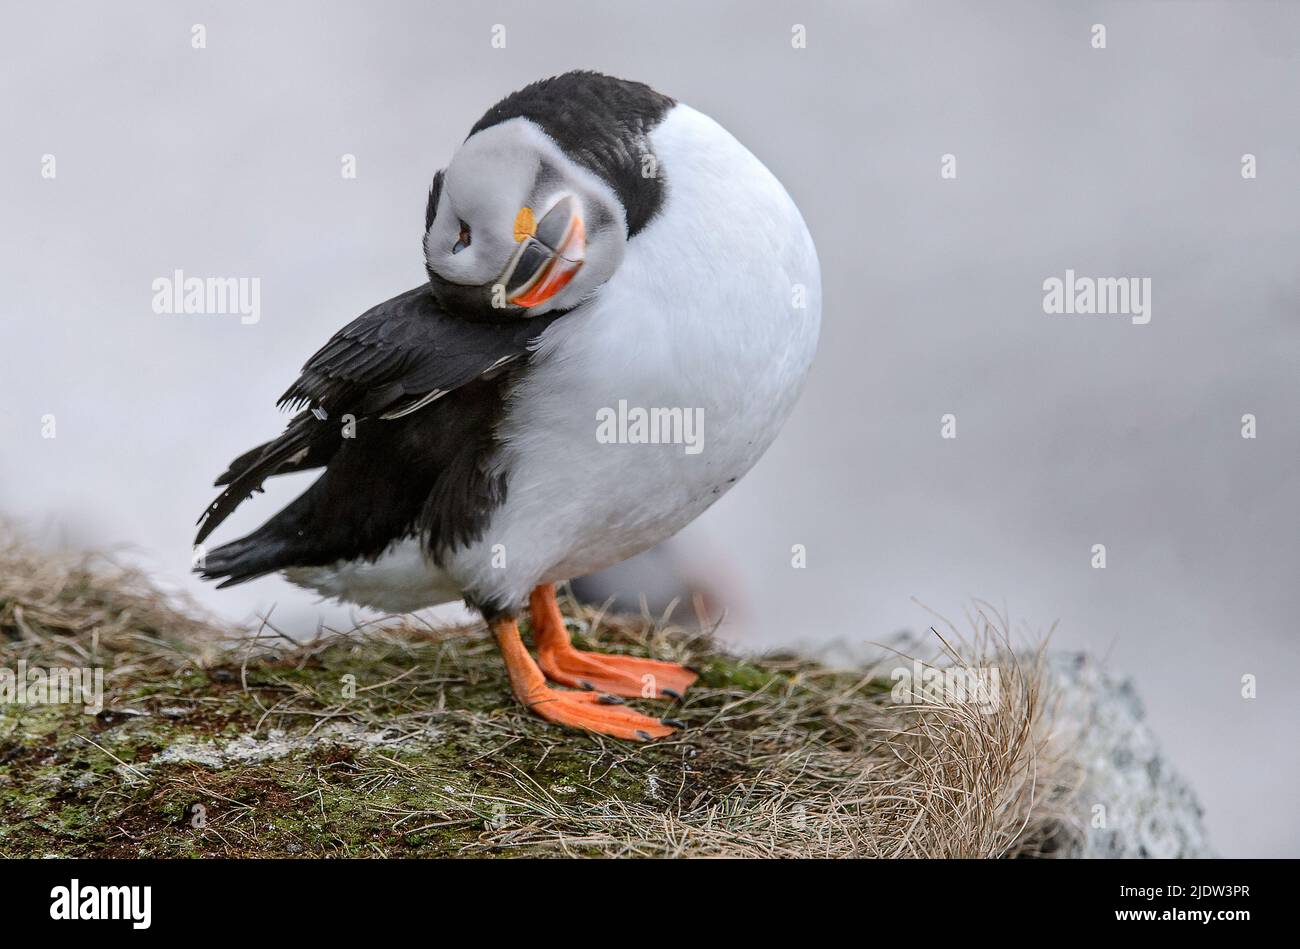 Atlantic puffin (Fratercula arctica) from the bird cliff at Hornøya, Finnmark, Norway. Stock Photo